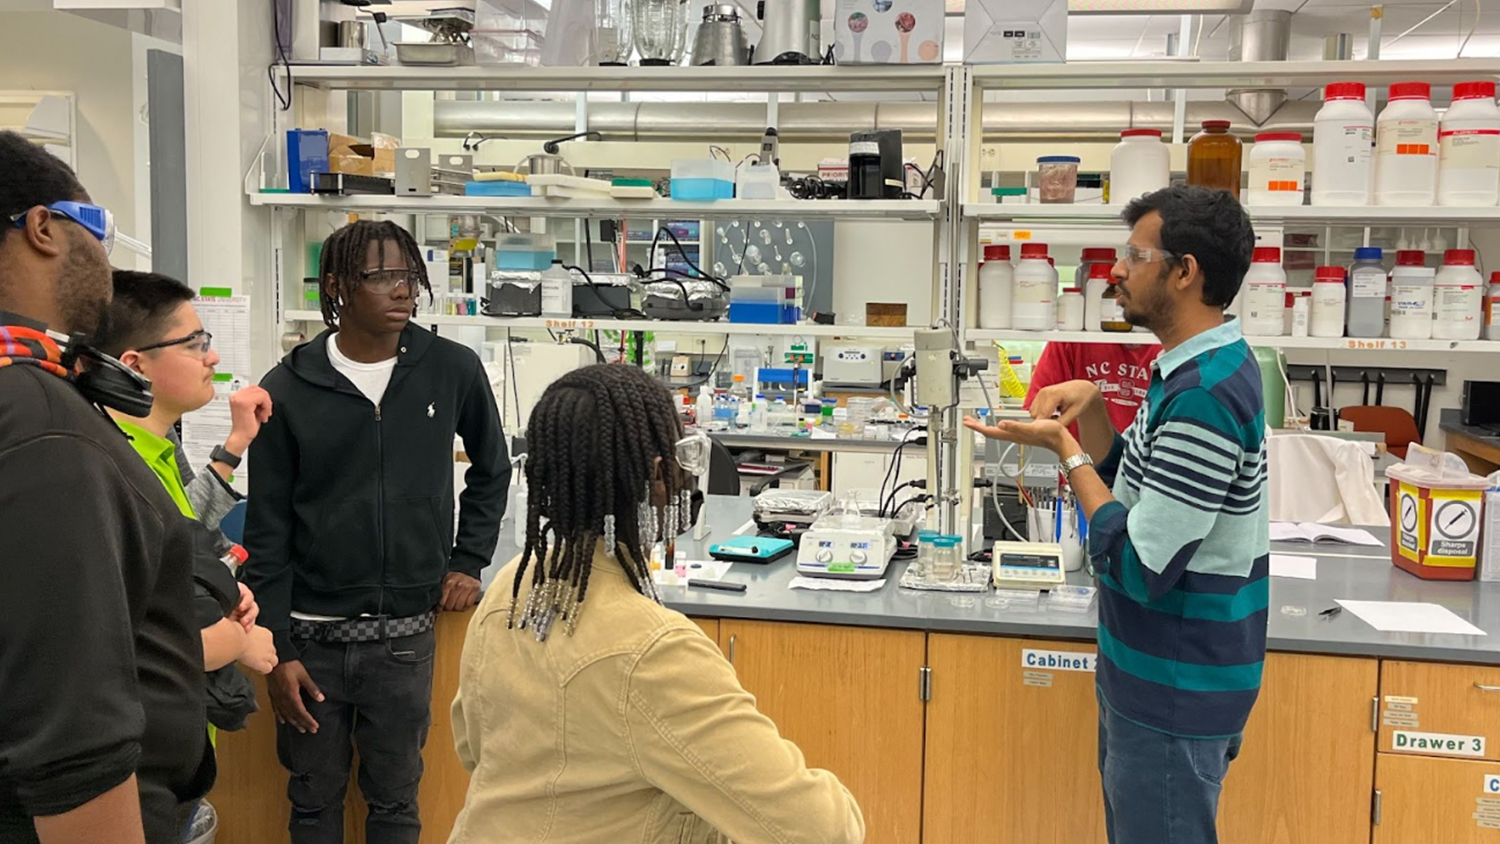 High school students listen to a professor while gathered in a laboratory.